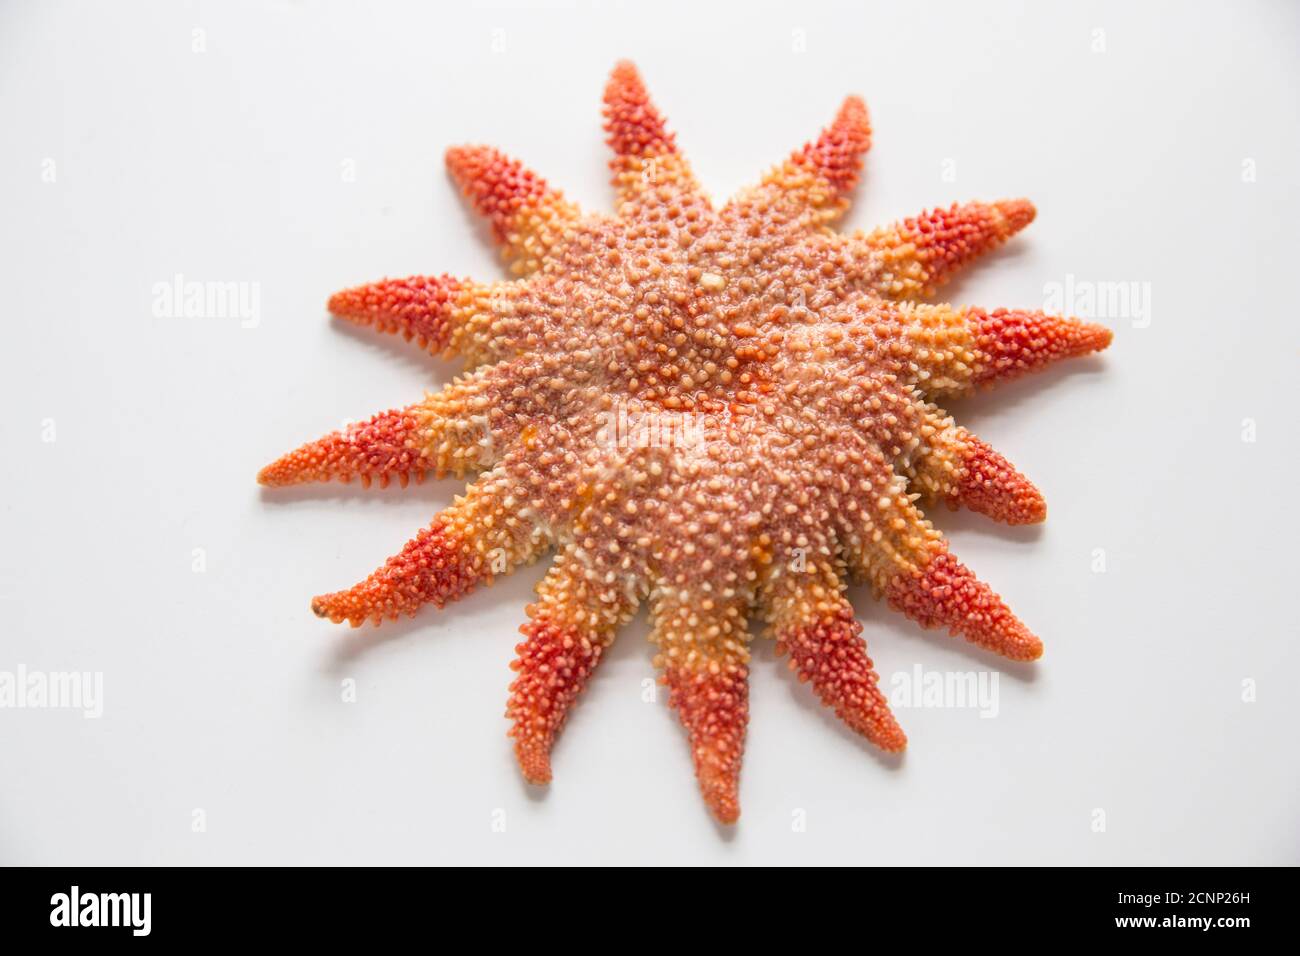 A common sunstar, Crossaster papposus, photographed on a white background. Dorset England UK GB Stock Photo